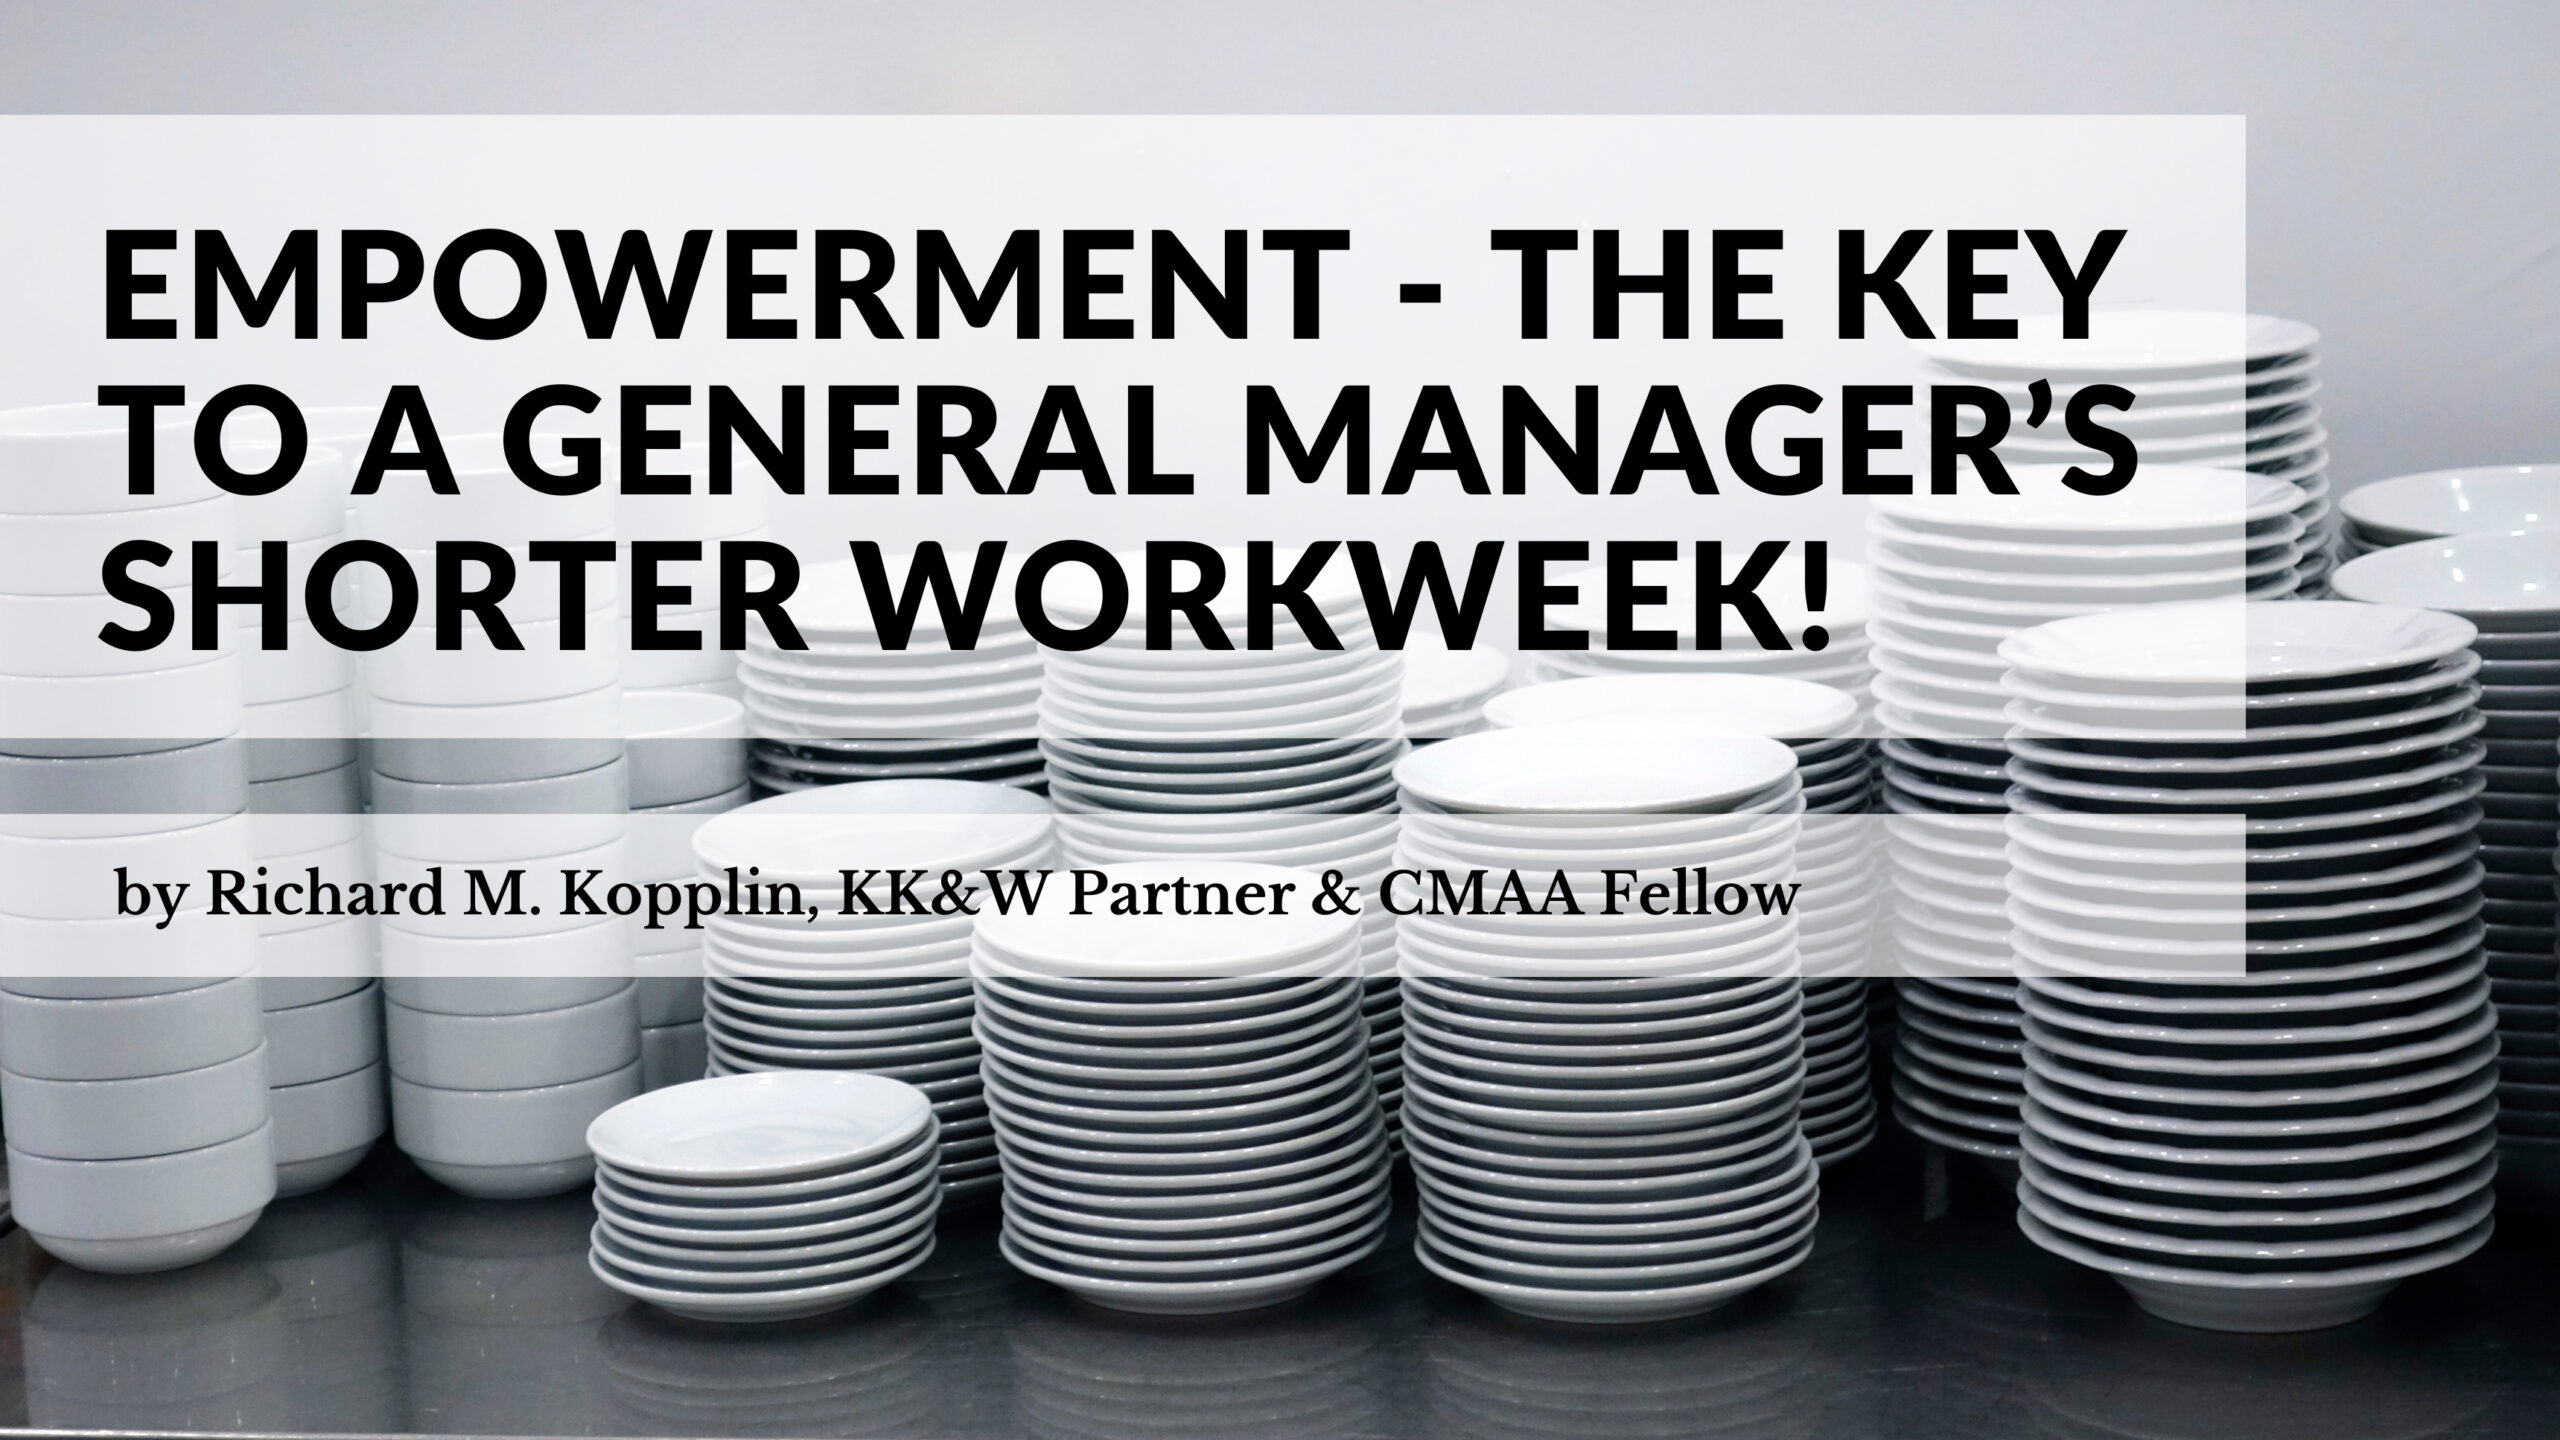 Empowerment - The Key to a General Manager’s Shorter Workweek!